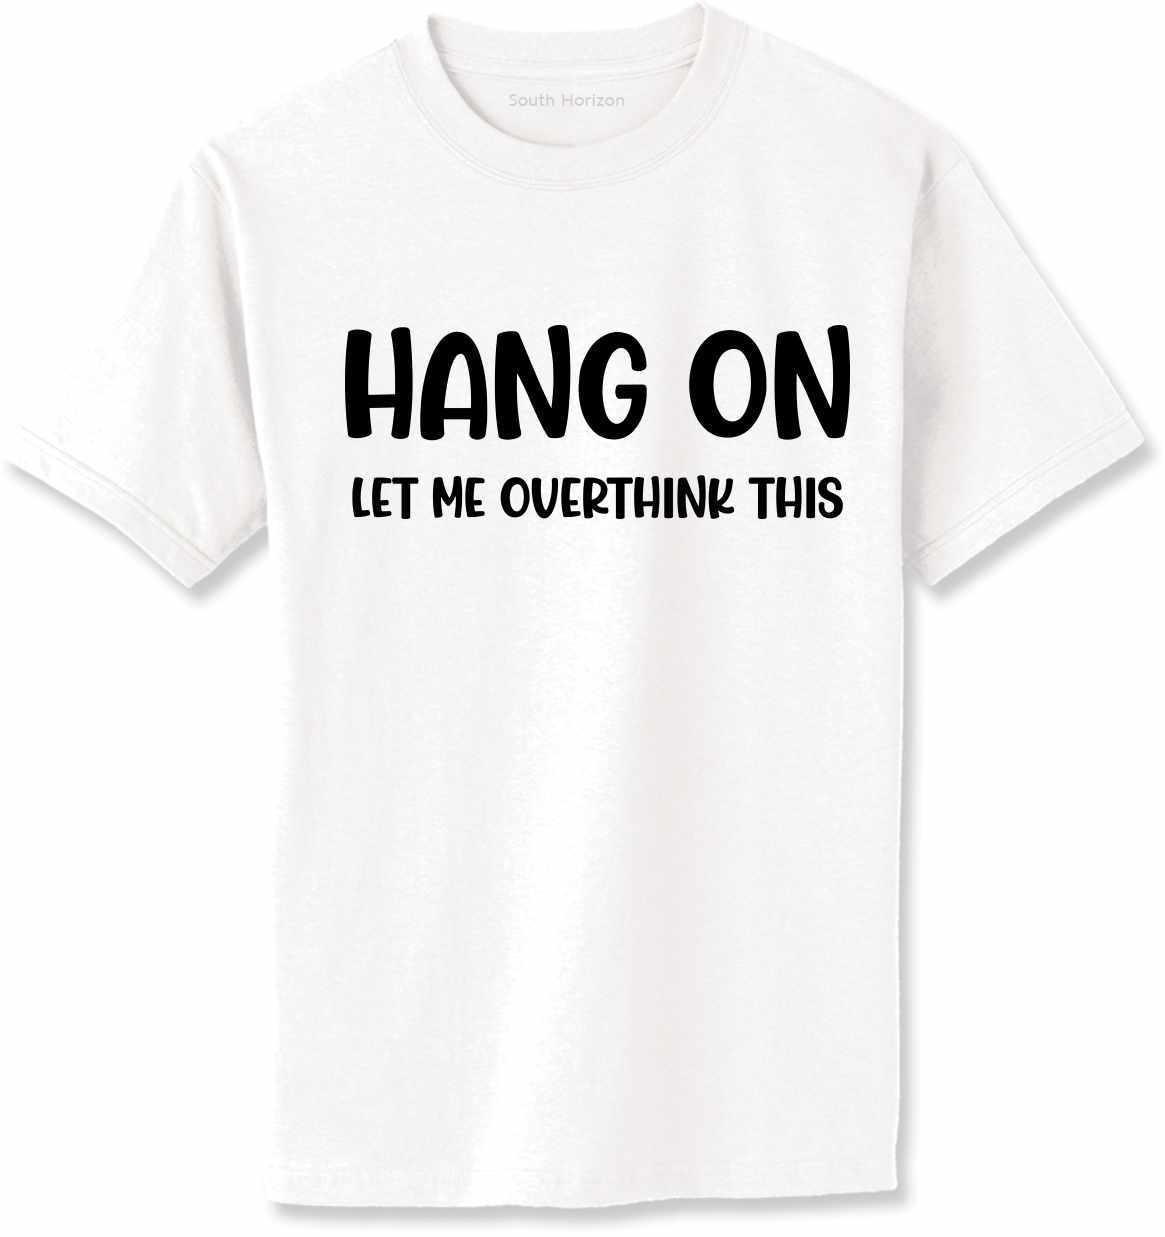 Hang On Let Me Overthink This on Adult T-Shirt (#1261-1)